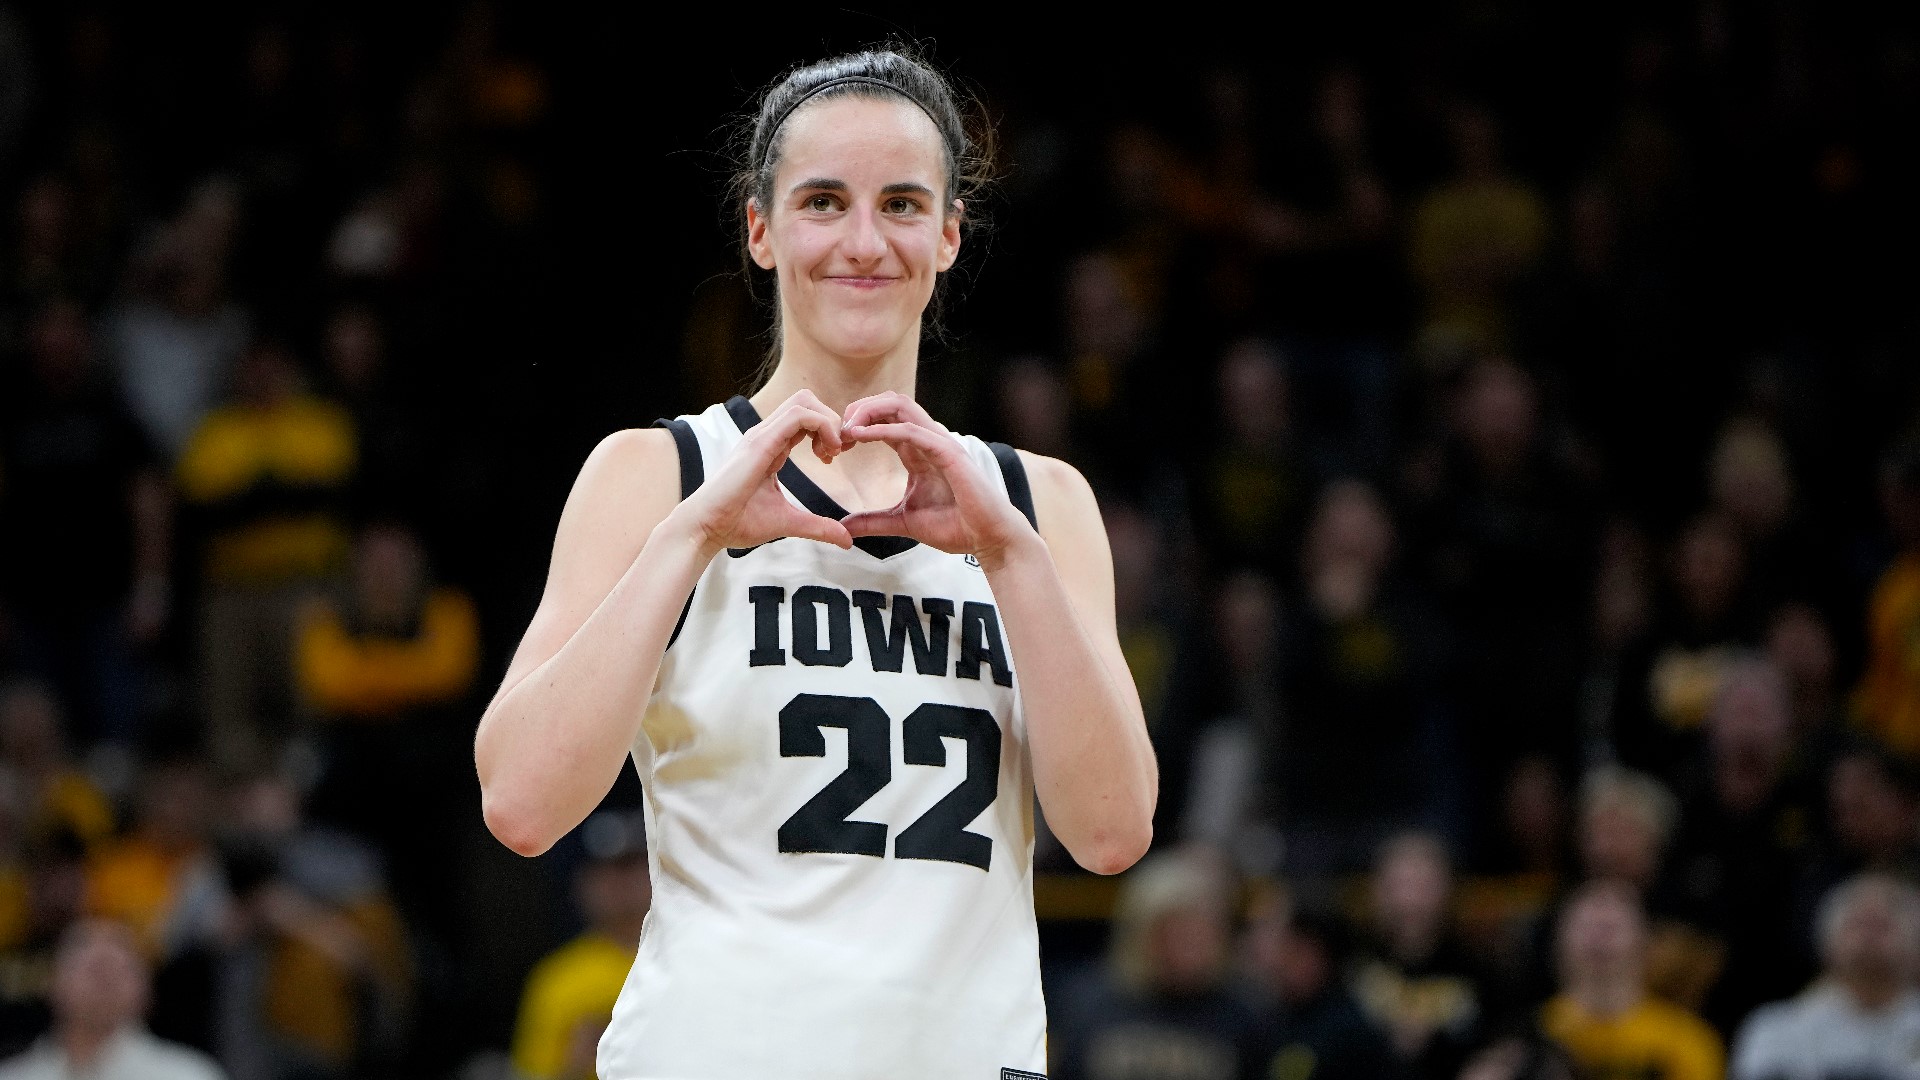 A day after announcing her intent to enter the WNBA draft - and likely be selected by the Indiana Fever - Caitlin Clark is a hot topic in Indianapolis.